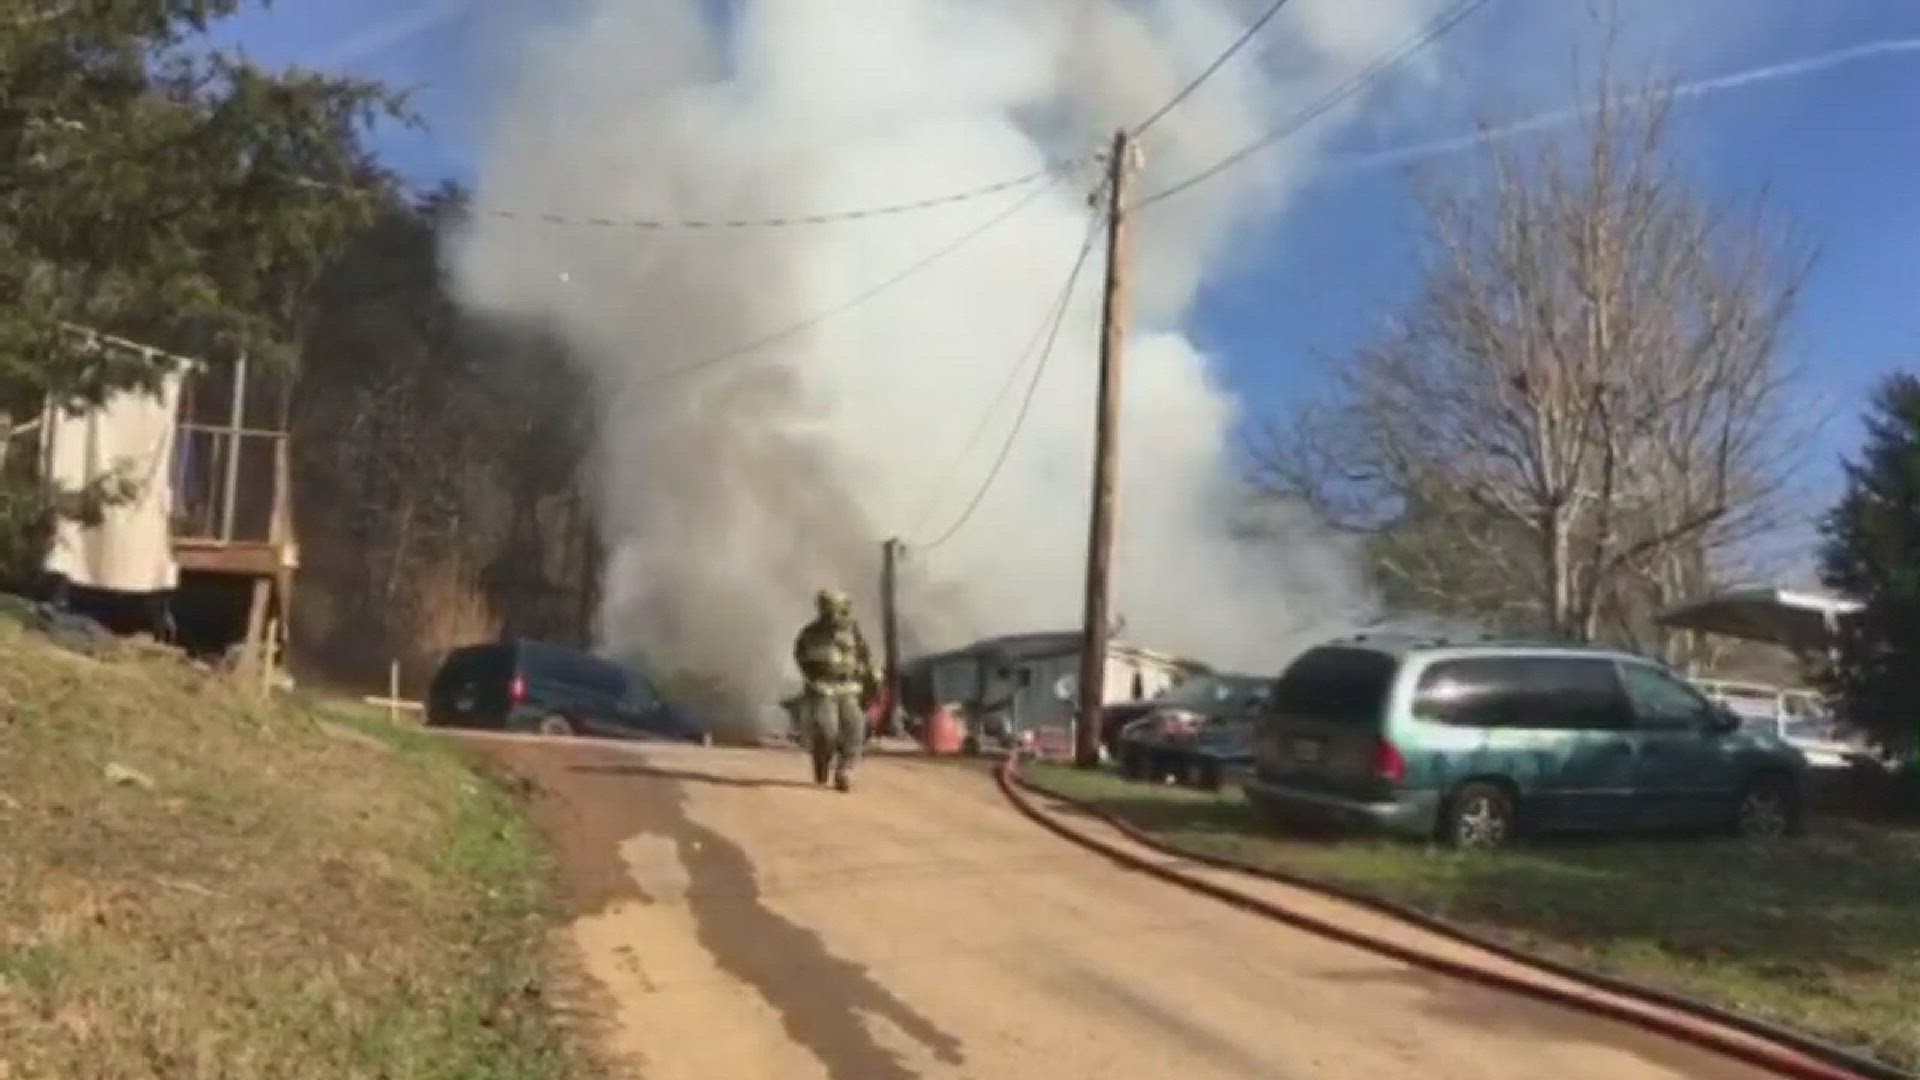 A fire burned down a mobile home in the Mascot area of Knox County, displacing a family.